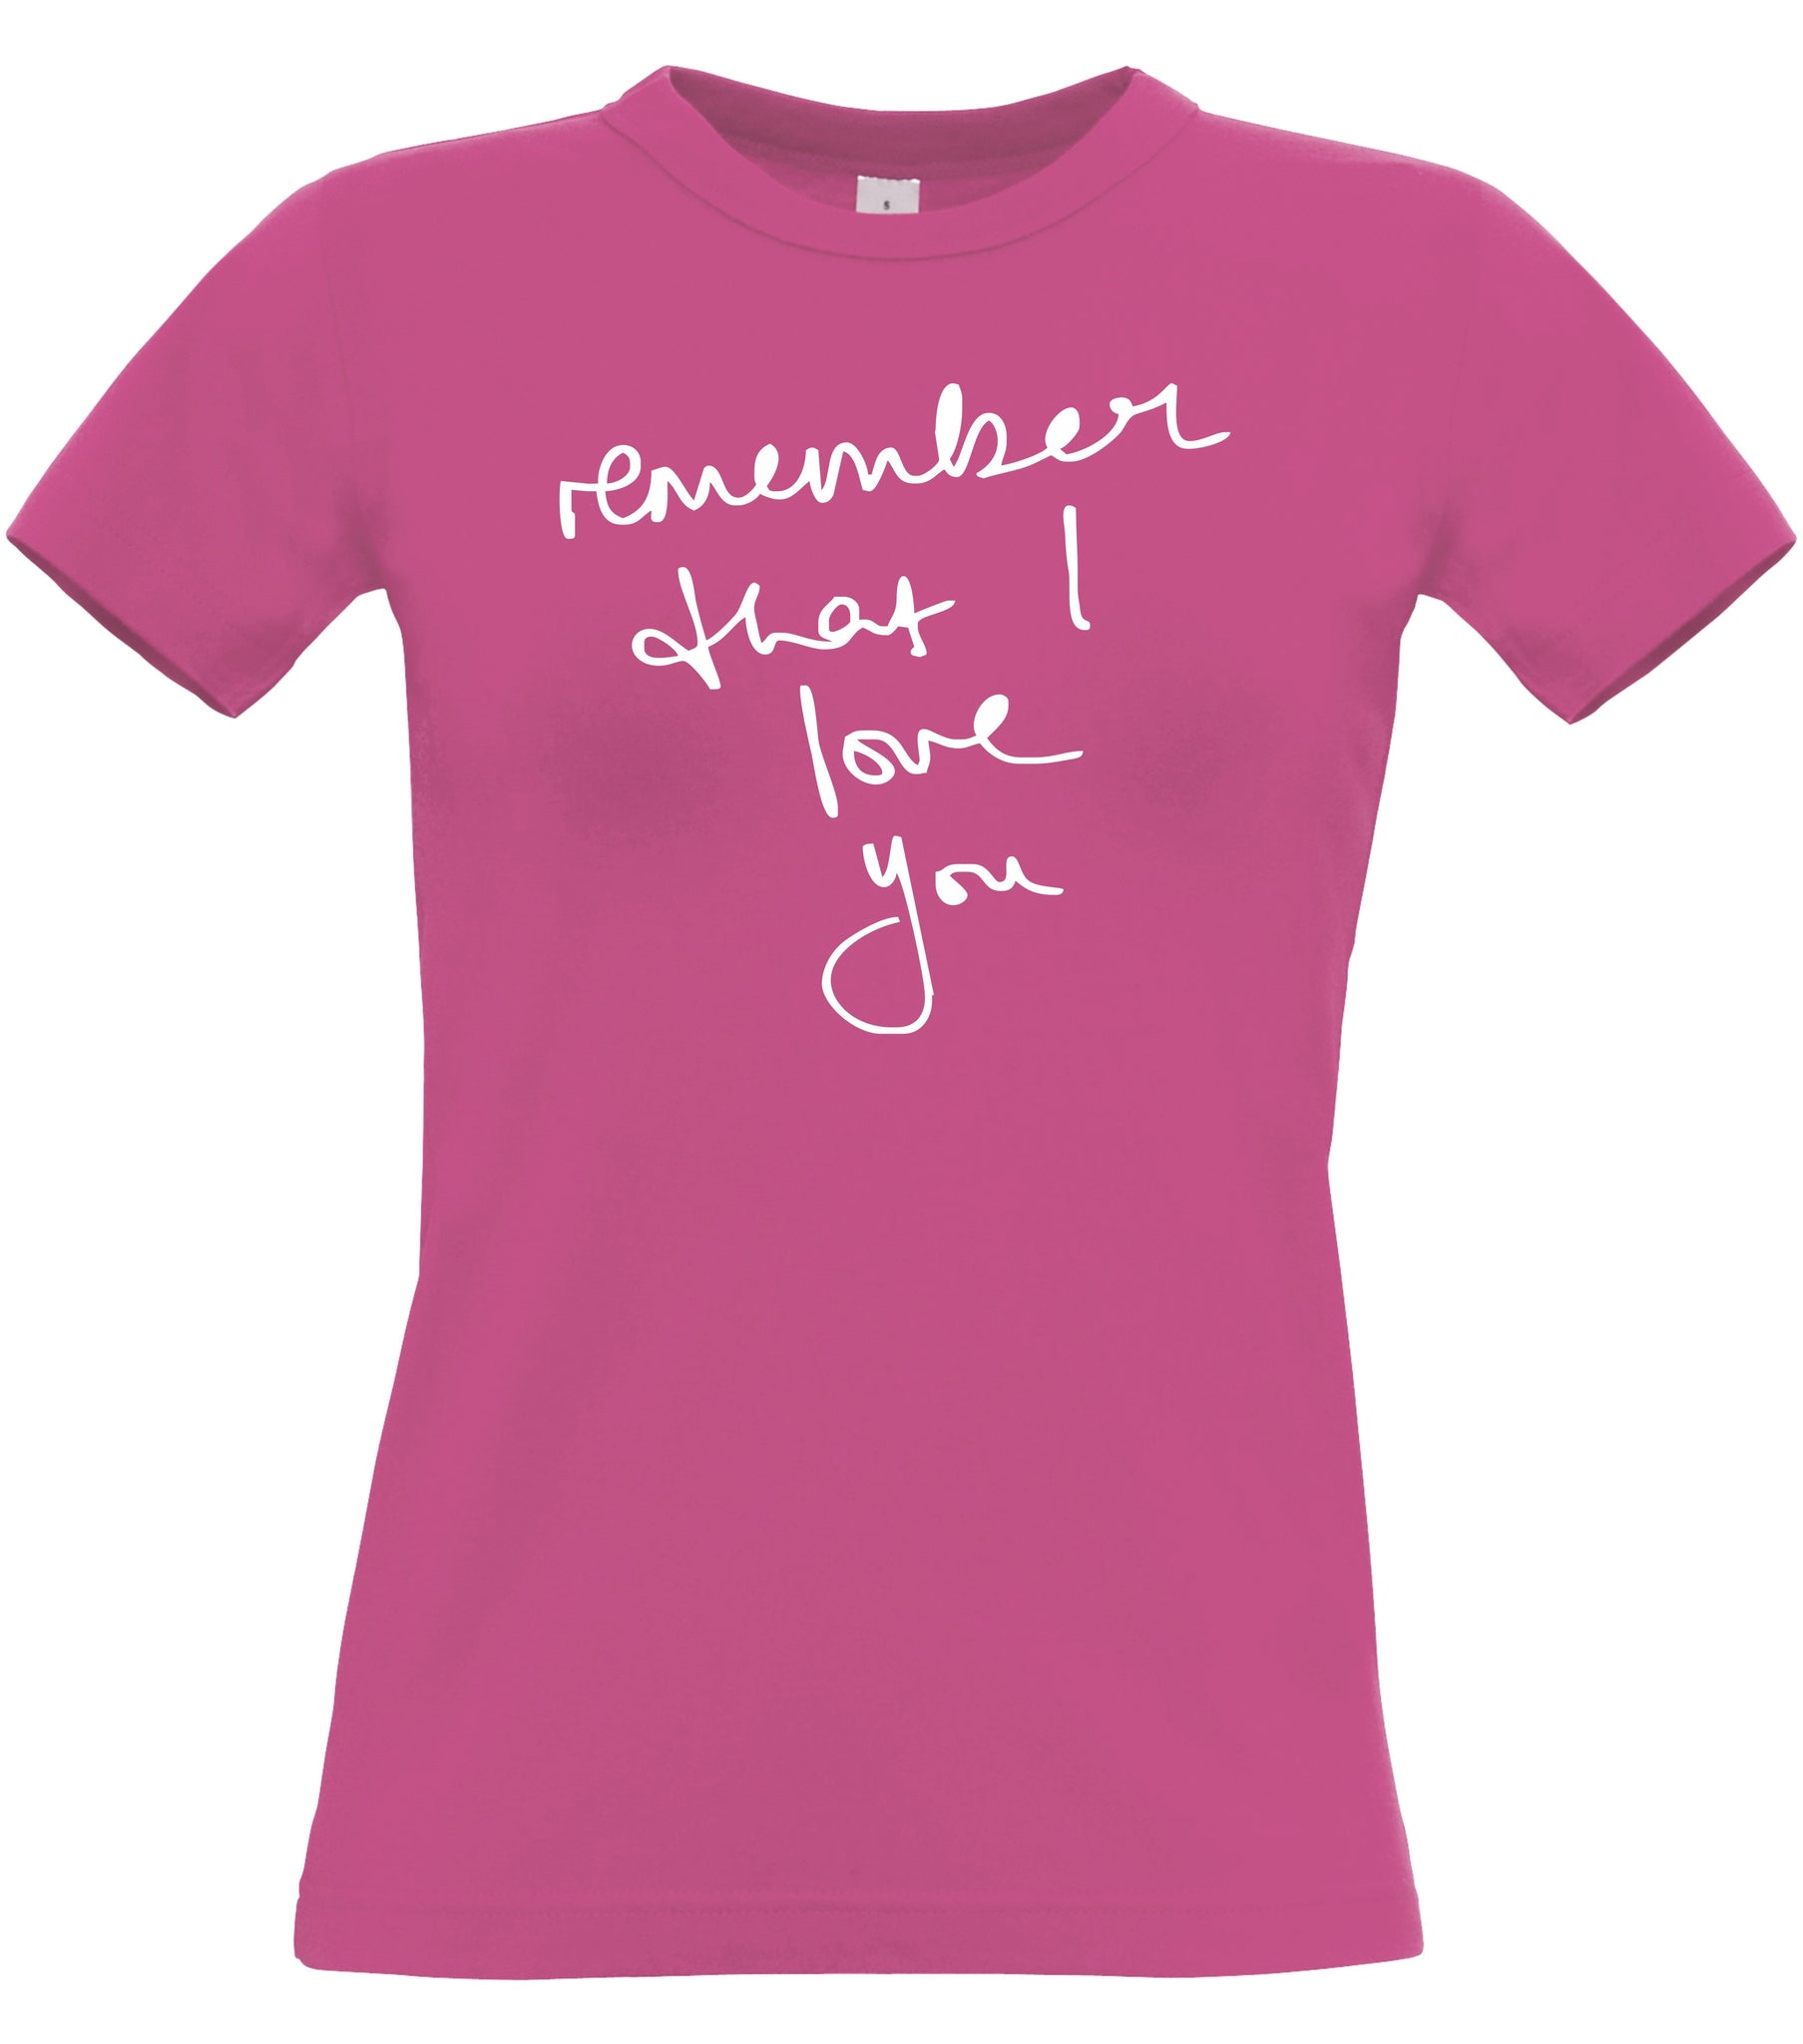 Remember that I Love you. Womans fitted T-Shirt